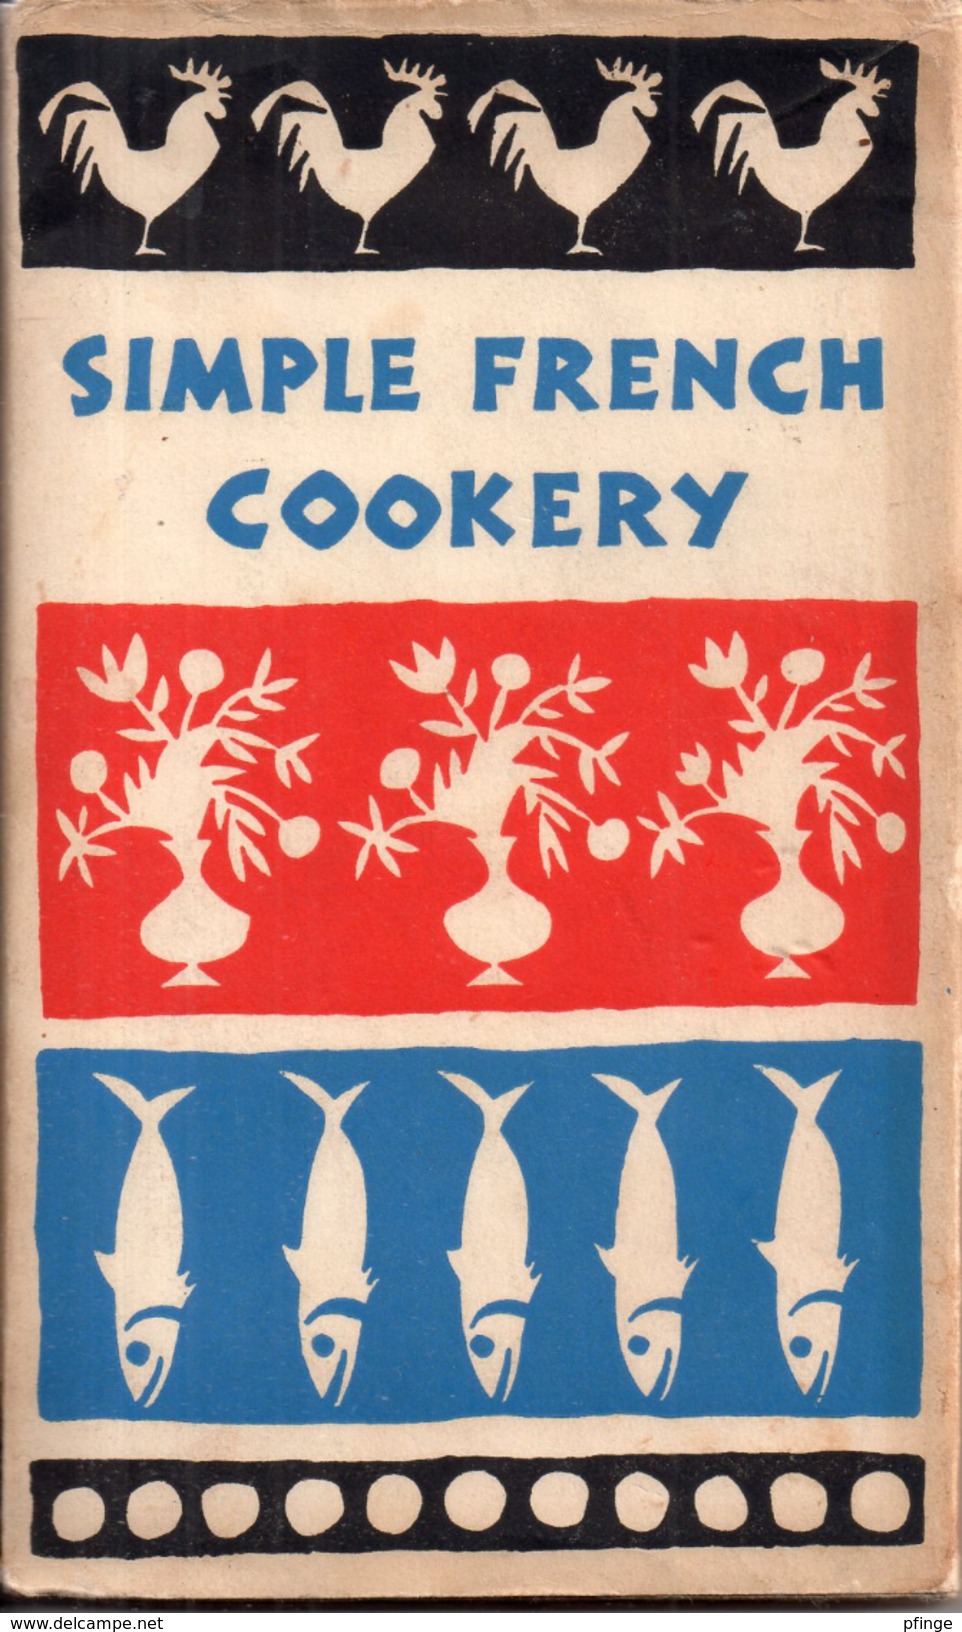 Simple French Cookery - Edna Beilenson - Décorations : Ruth McCrea, 1958 - Europese